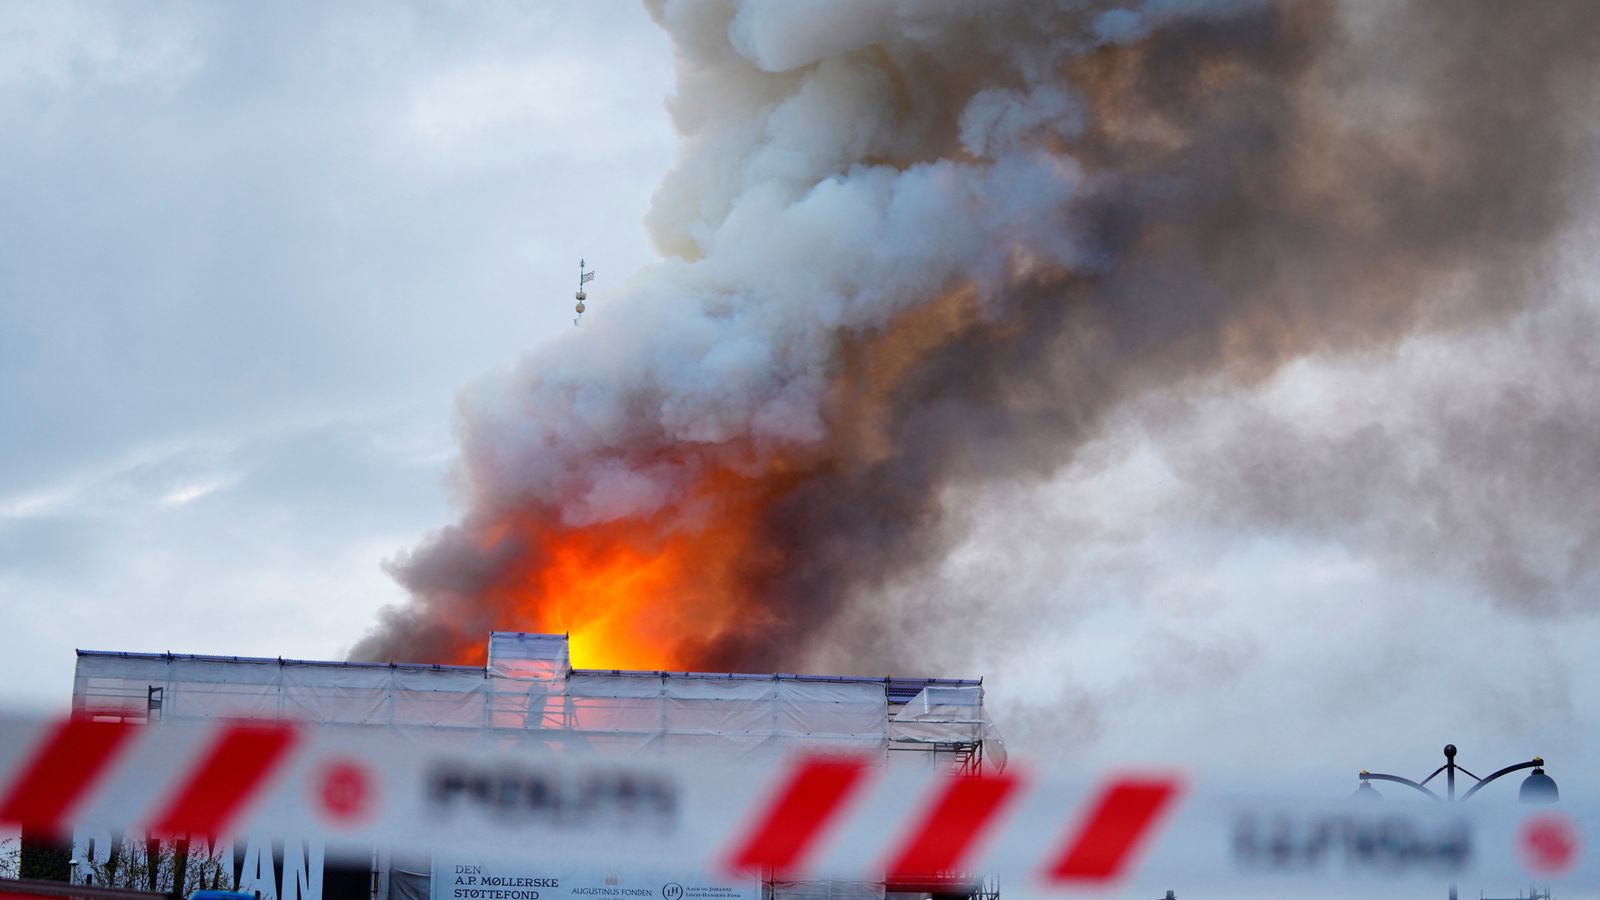 fire breaks out at one of copenhagen's oldest buildings - as spire collapses